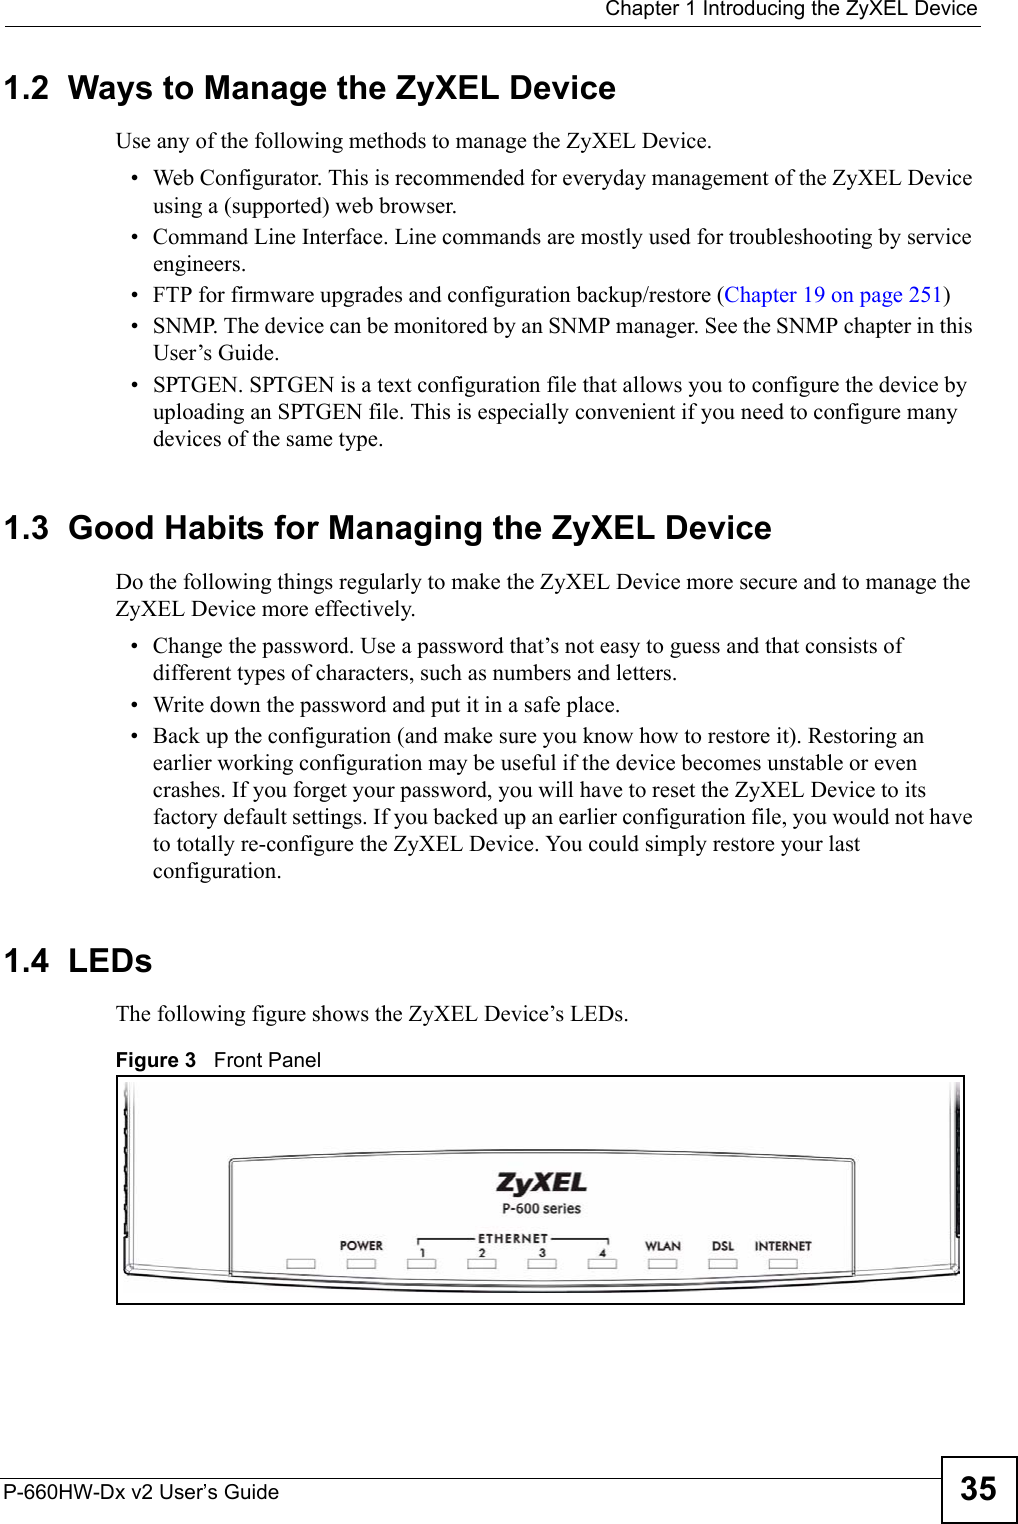  Chapter 1 Introducing the ZyXEL DeviceP-660HW-Dx v2 User’s Guide 351.2  Ways to Manage the ZyXEL DeviceUse any of the following methods to manage the ZyXEL Device.• Web Configurator. This is recommended for everyday management of the ZyXEL Device using a (supported) web browser.• Command Line Interface. Line commands are mostly used for troubleshooting by service engineers.• FTP for firmware upgrades and configuration backup/restore (Chapter 19 on page 251)• SNMP. The device can be monitored by an SNMP manager. See the SNMP chapter in this User’s Guide.• SPTGEN. SPTGEN is a text configuration file that allows you to configure the device by uploading an SPTGEN file. This is especially convenient if you need to configure many devices of the same type. 1.3  Good Habits for Managing the ZyXEL DeviceDo the following things regularly to make the ZyXEL Device more secure and to manage the ZyXEL Device more effectively.• Change the password. Use a password that’s not easy to guess and that consists of different types of characters, such as numbers and letters.• Write down the password and put it in a safe place.• Back up the configuration (and make sure you know how to restore it). Restoring an earlier working configuration may be useful if the device becomes unstable or even crashes. If you forget your password, you will have to reset the ZyXEL Device to its factory default settings. If you backed up an earlier configuration file, you would not have to totally re-configure the ZyXEL Device. You could simply restore your last configuration.1.4  LEDsThe following figure shows the ZyXEL Device’s LEDs. Figure 3   Front Panel 